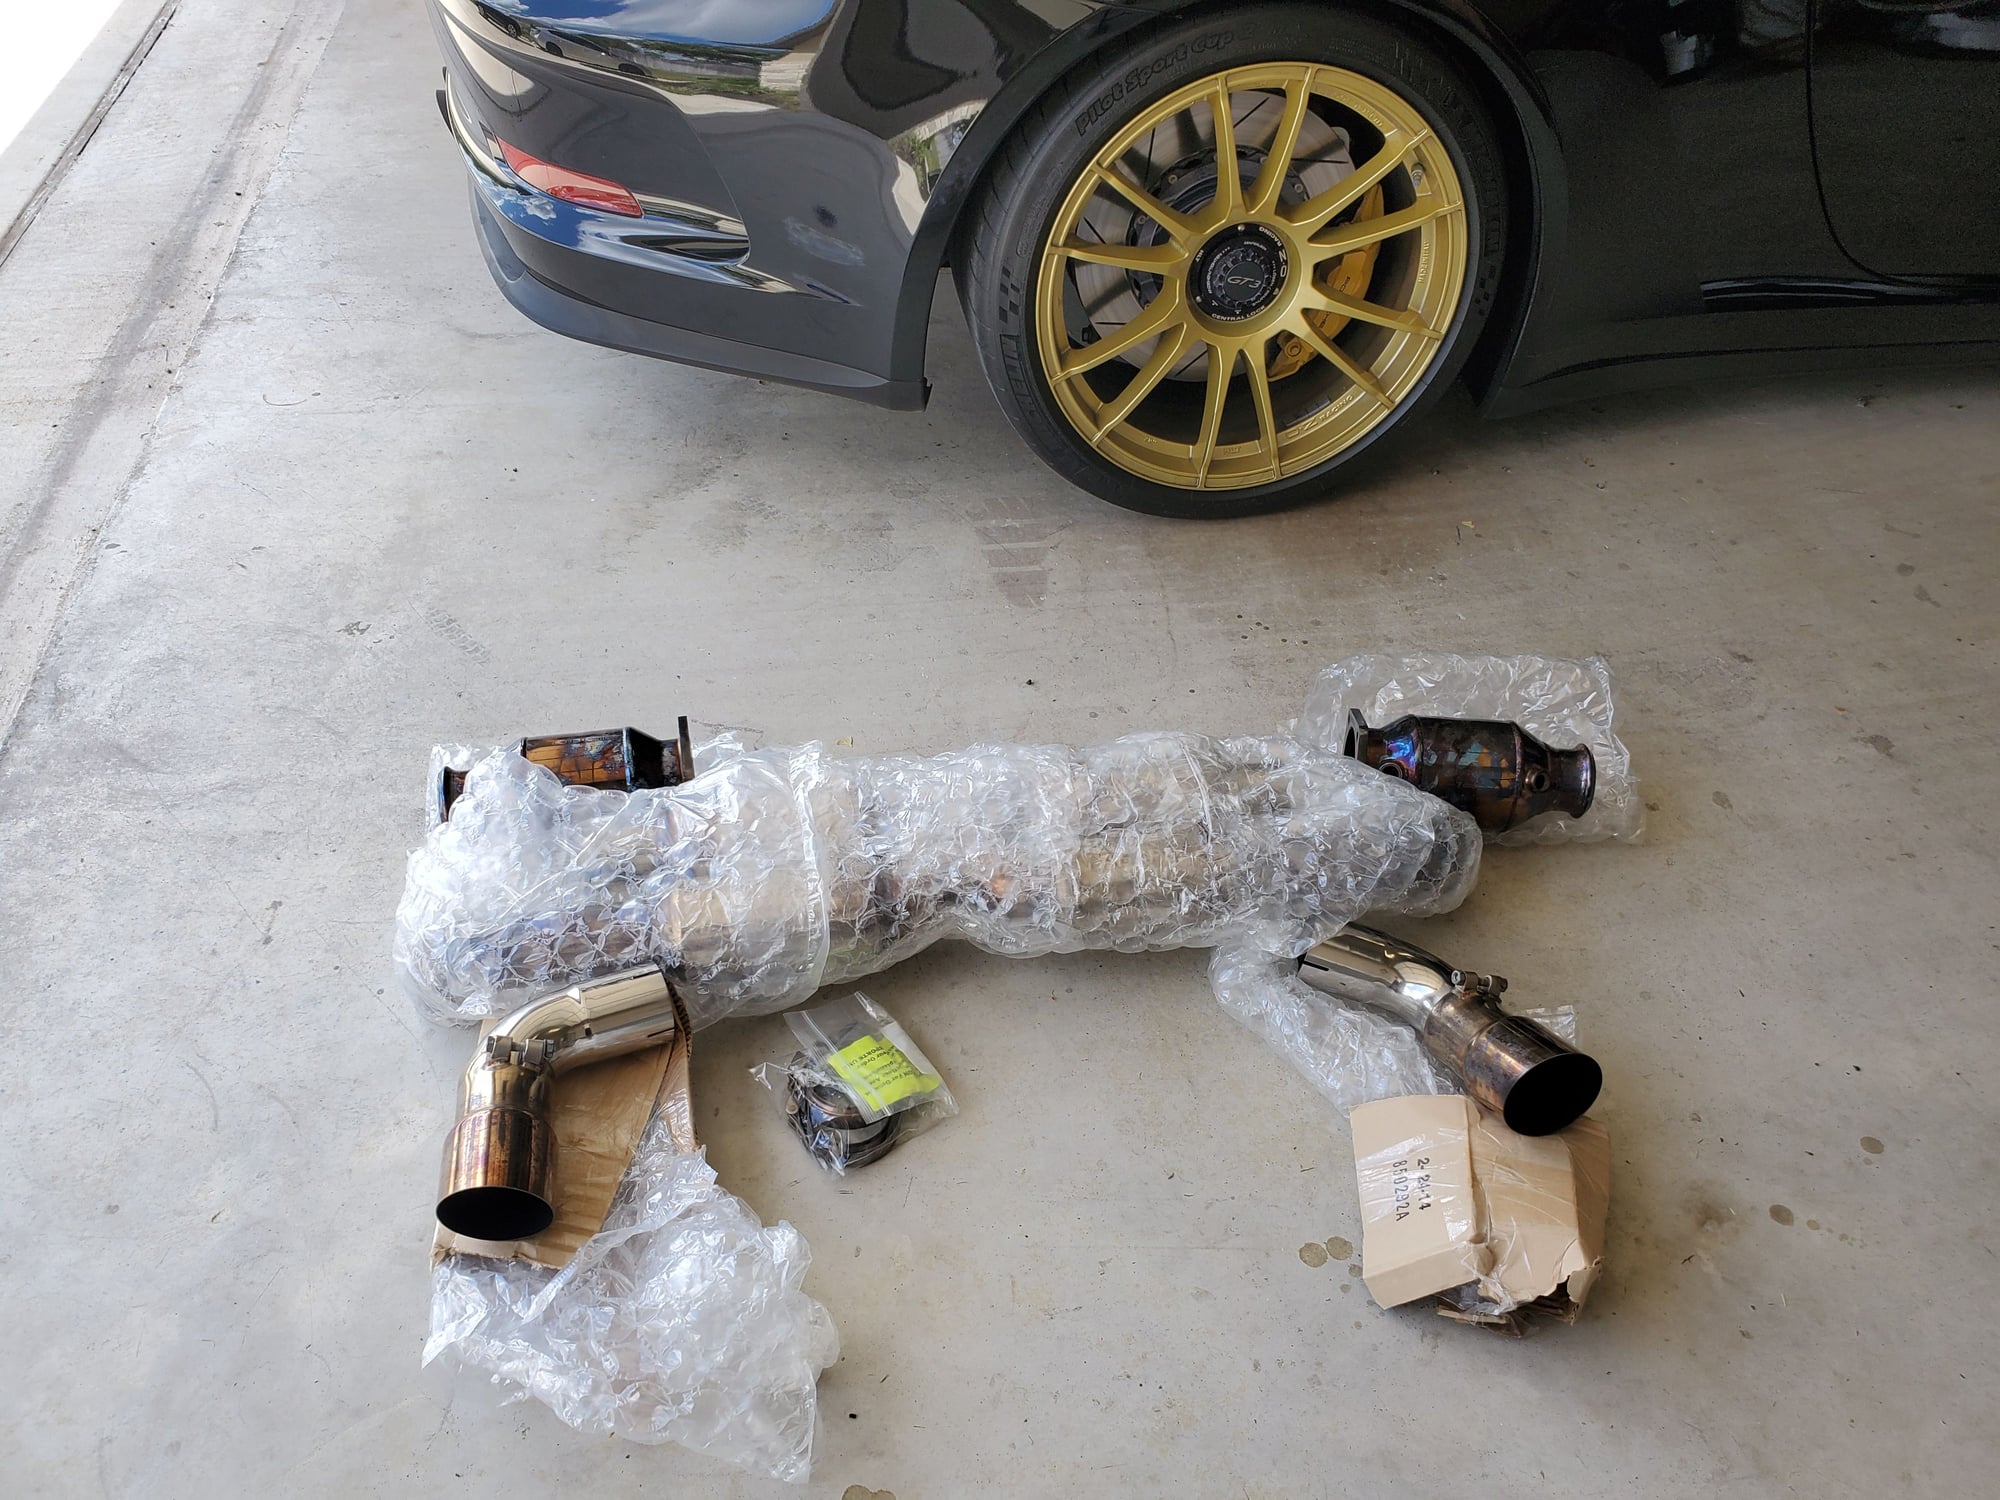 Engine - Exhaust - Fabspeed 997 Turbo Exhaust (with stainless GT2 tips) - New - 2006 to 2012 Porsche 911 - Austin, TX 78633, United States